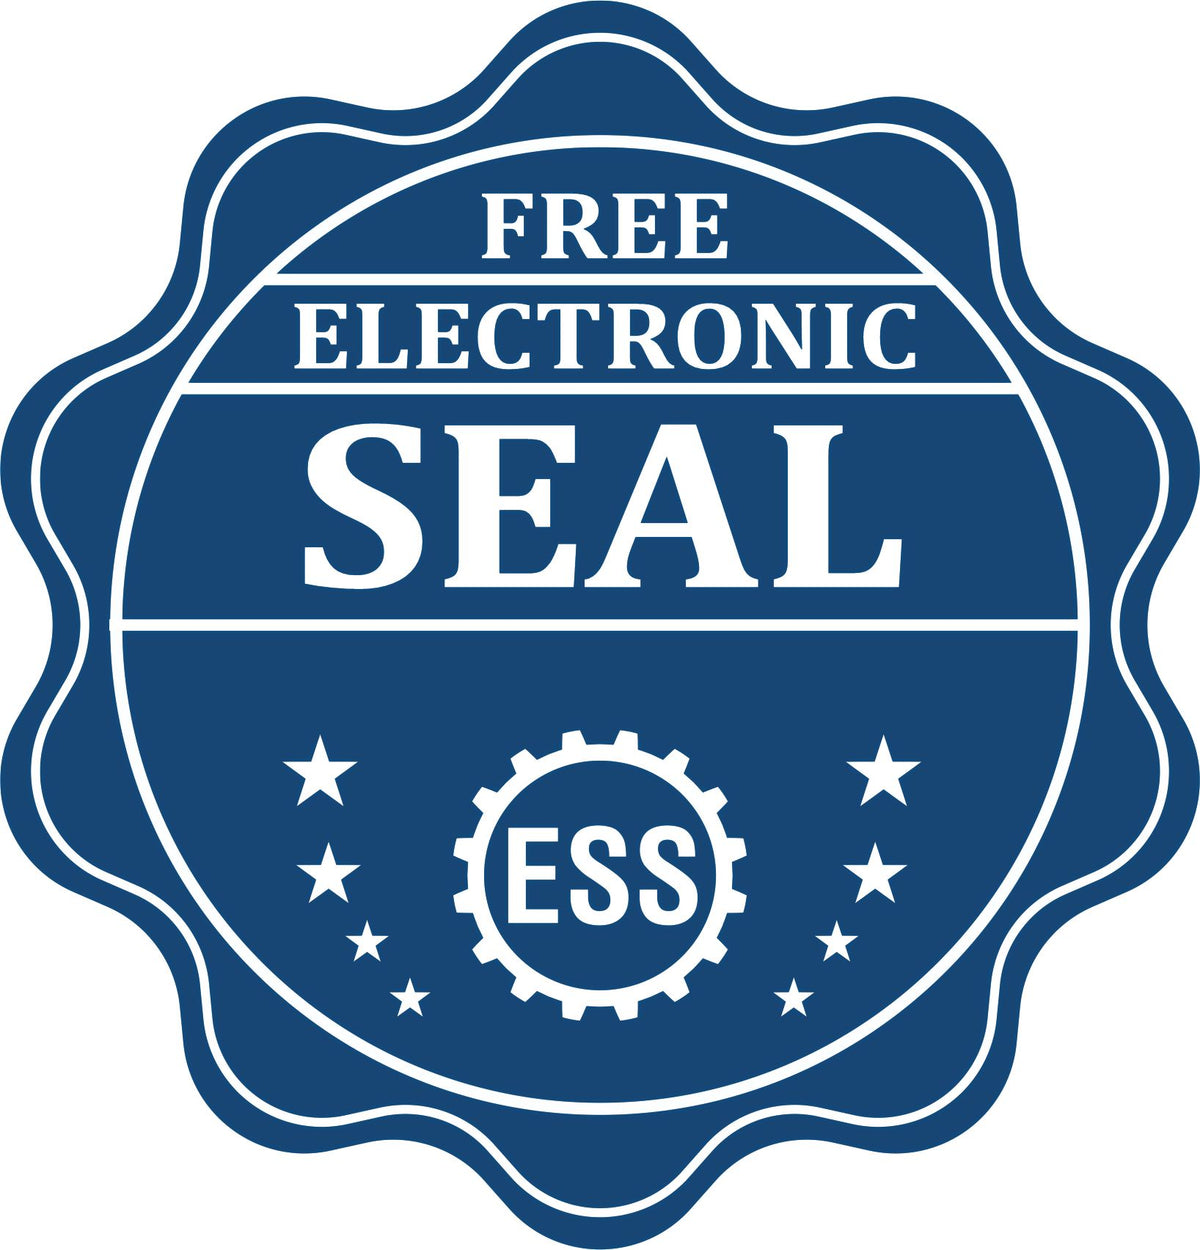 A badge showing a free electronic seal for the Hybrid New Mexico Land Surveyor Seal with stars and the ESS gear on the emblem.